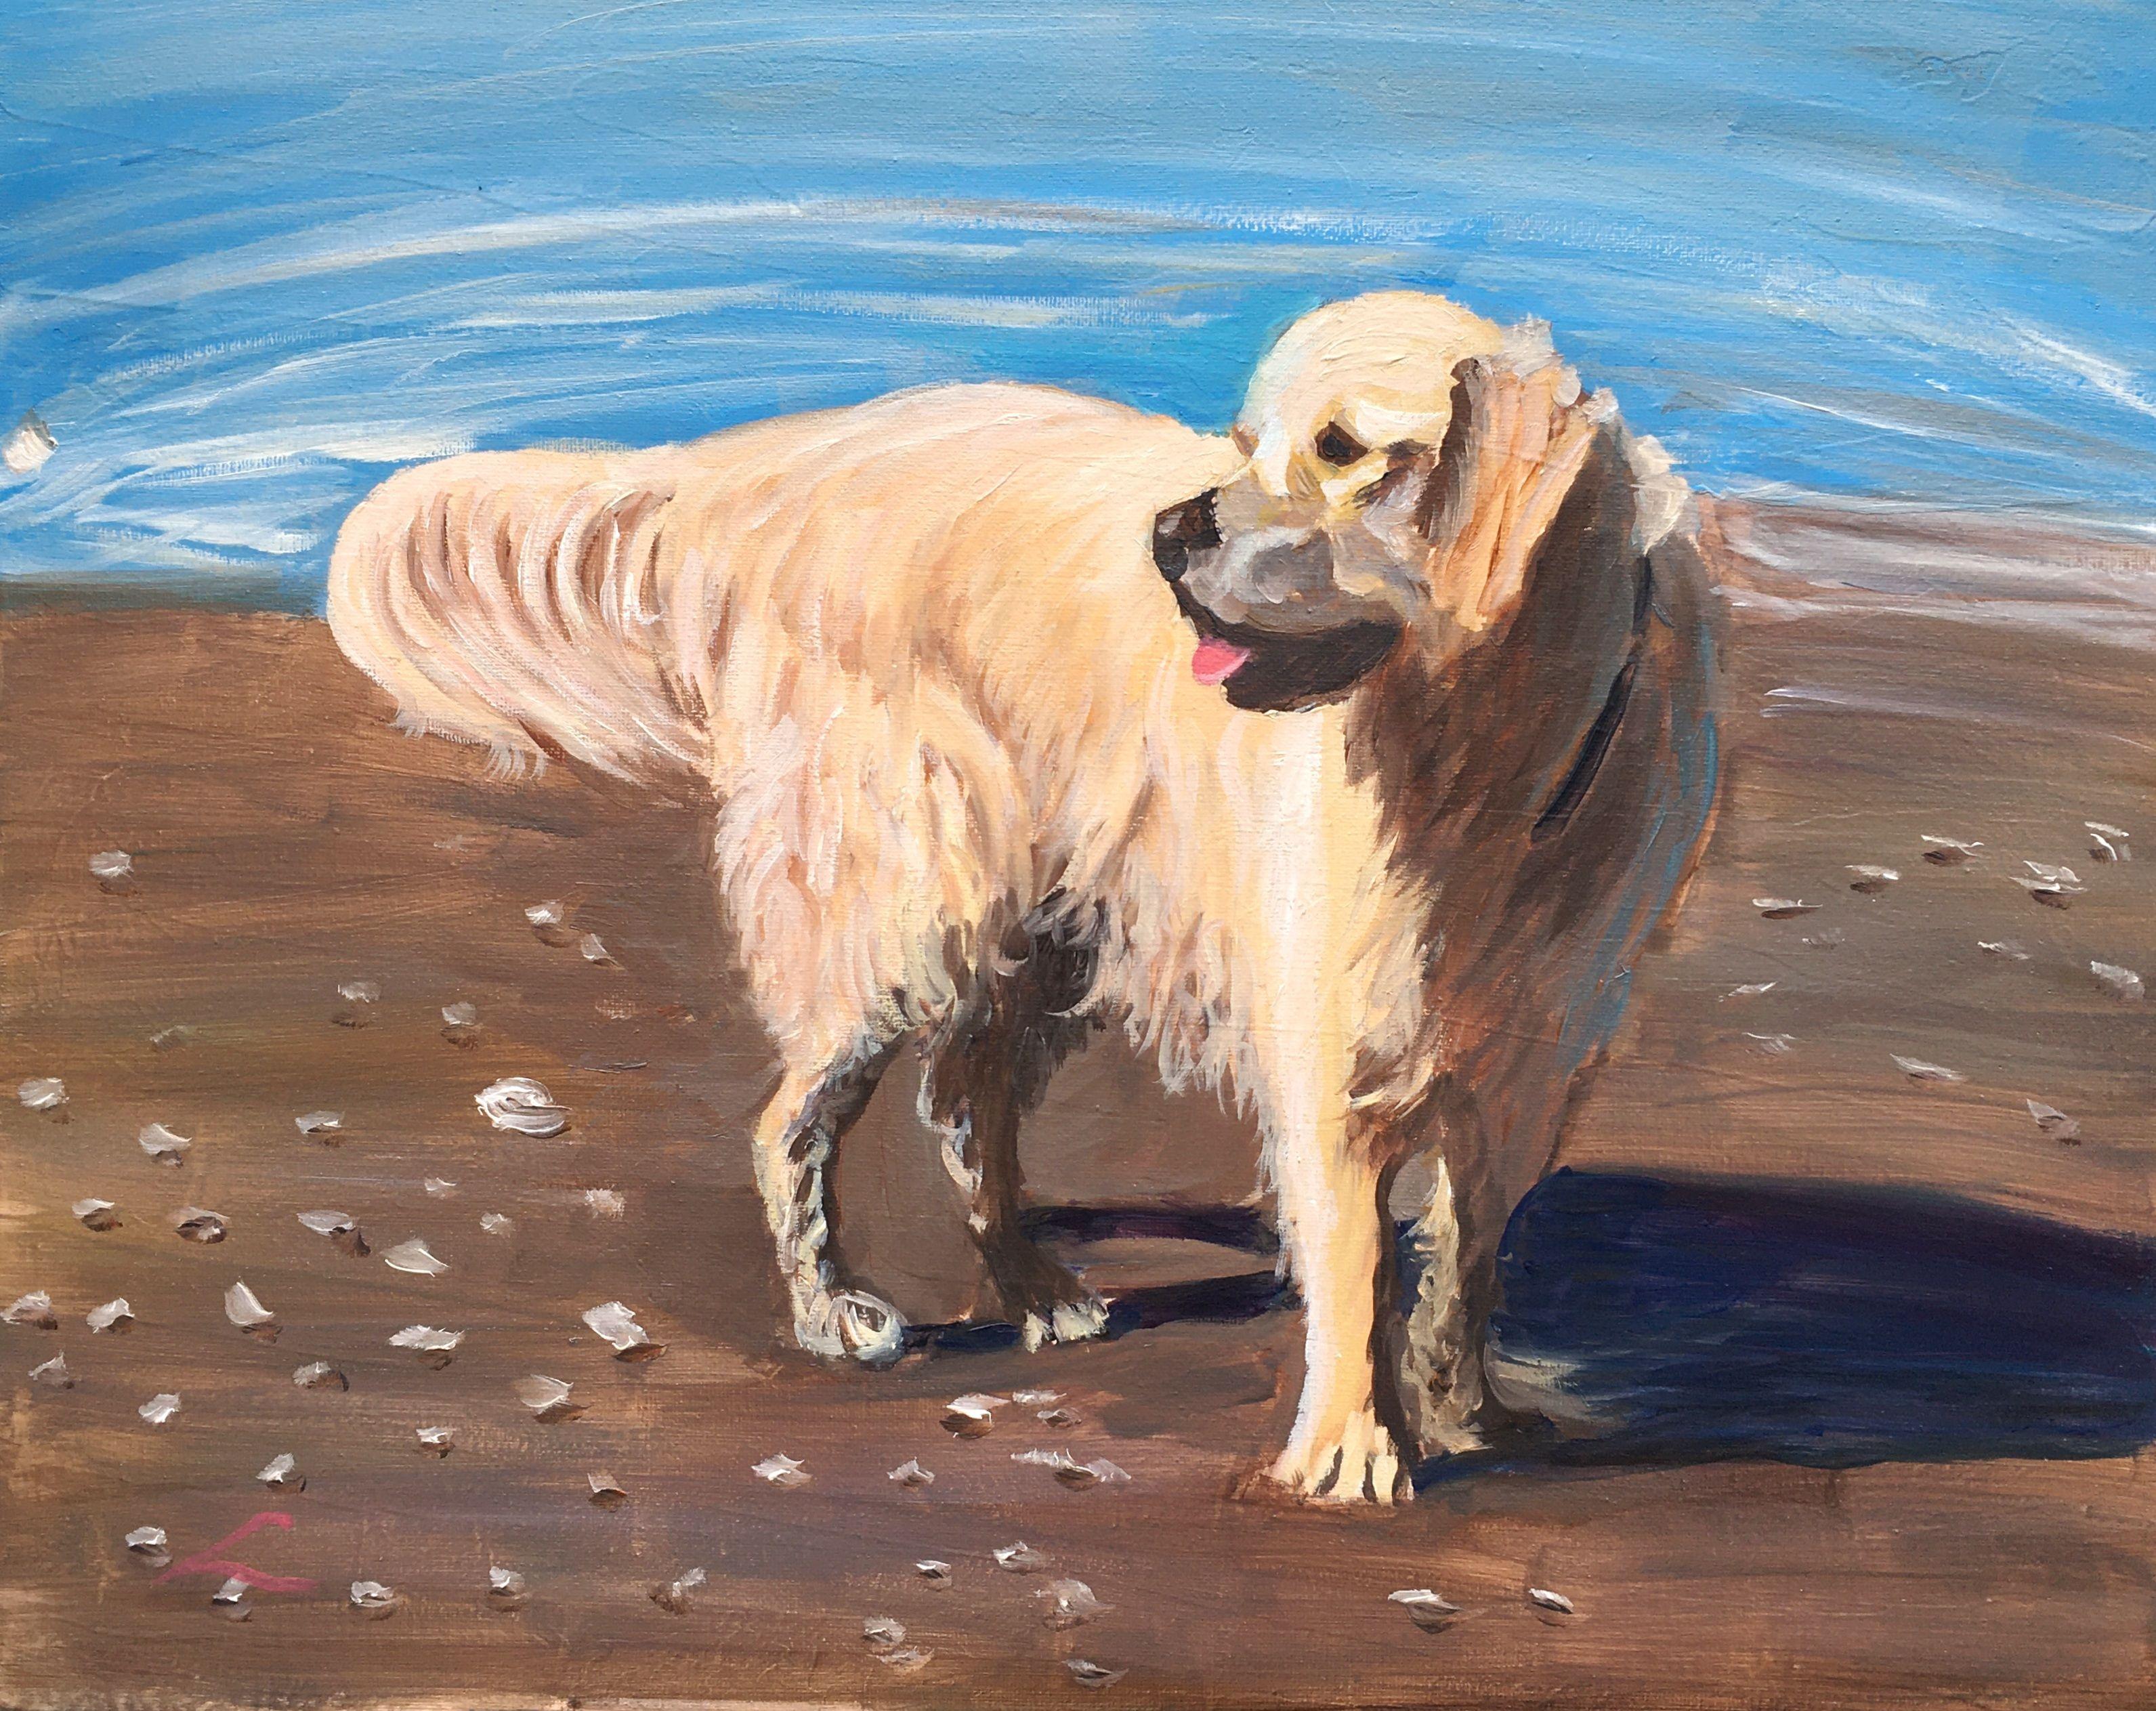 Dog at the sea. Alla prima oil painting with few final taches when dry. Beautiful weather with a big shining sun. And Iâ€™m standing there taking it all in. The many spectacular sights jump at my eyes. Kids and dogs run around and splash each other